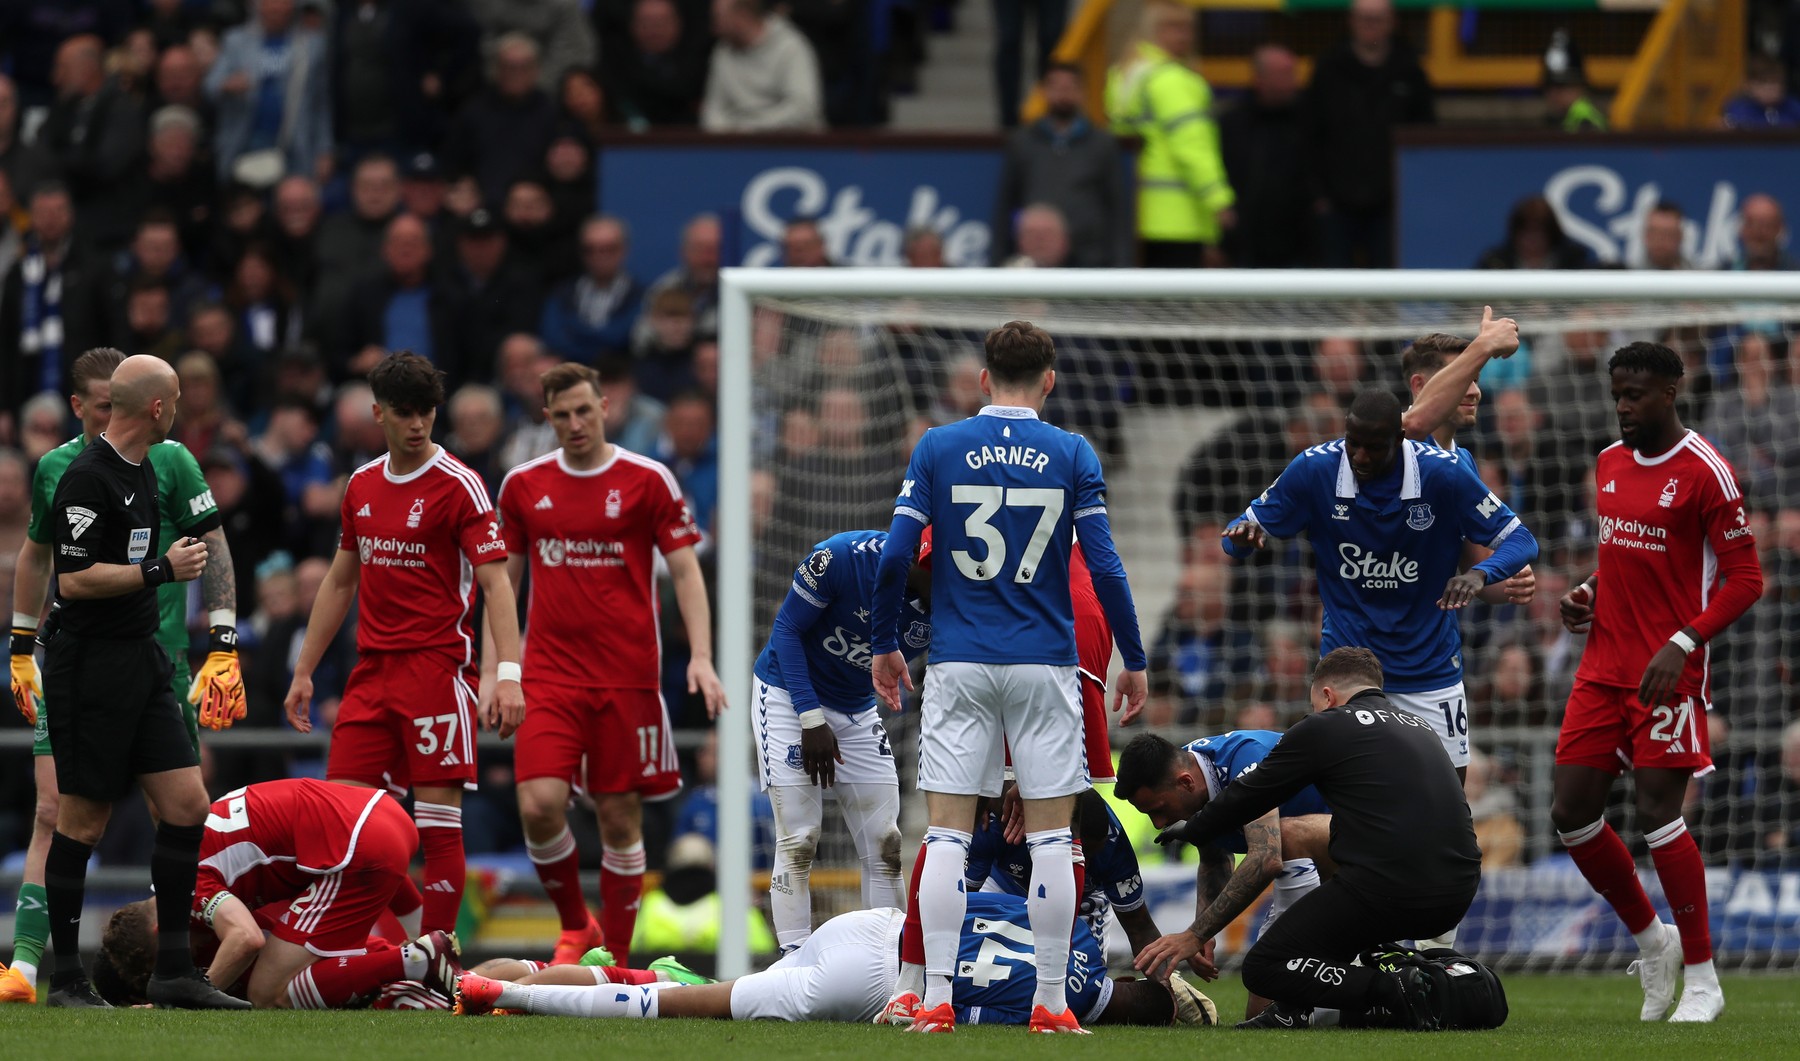 21st April 2024; Goodison Park, Liverpool, England; Premier League Football, Everton versus Nottingham Forest; Beto of Everton receives treatment after a collision with Morgan Gibbs-White of Nottingham Forest  before being stretchered off,Image: 866721311, License: Rights-managed, Restrictions: , Model Release: no, Credit line: David Blunsden / Actionplus / Profimedia